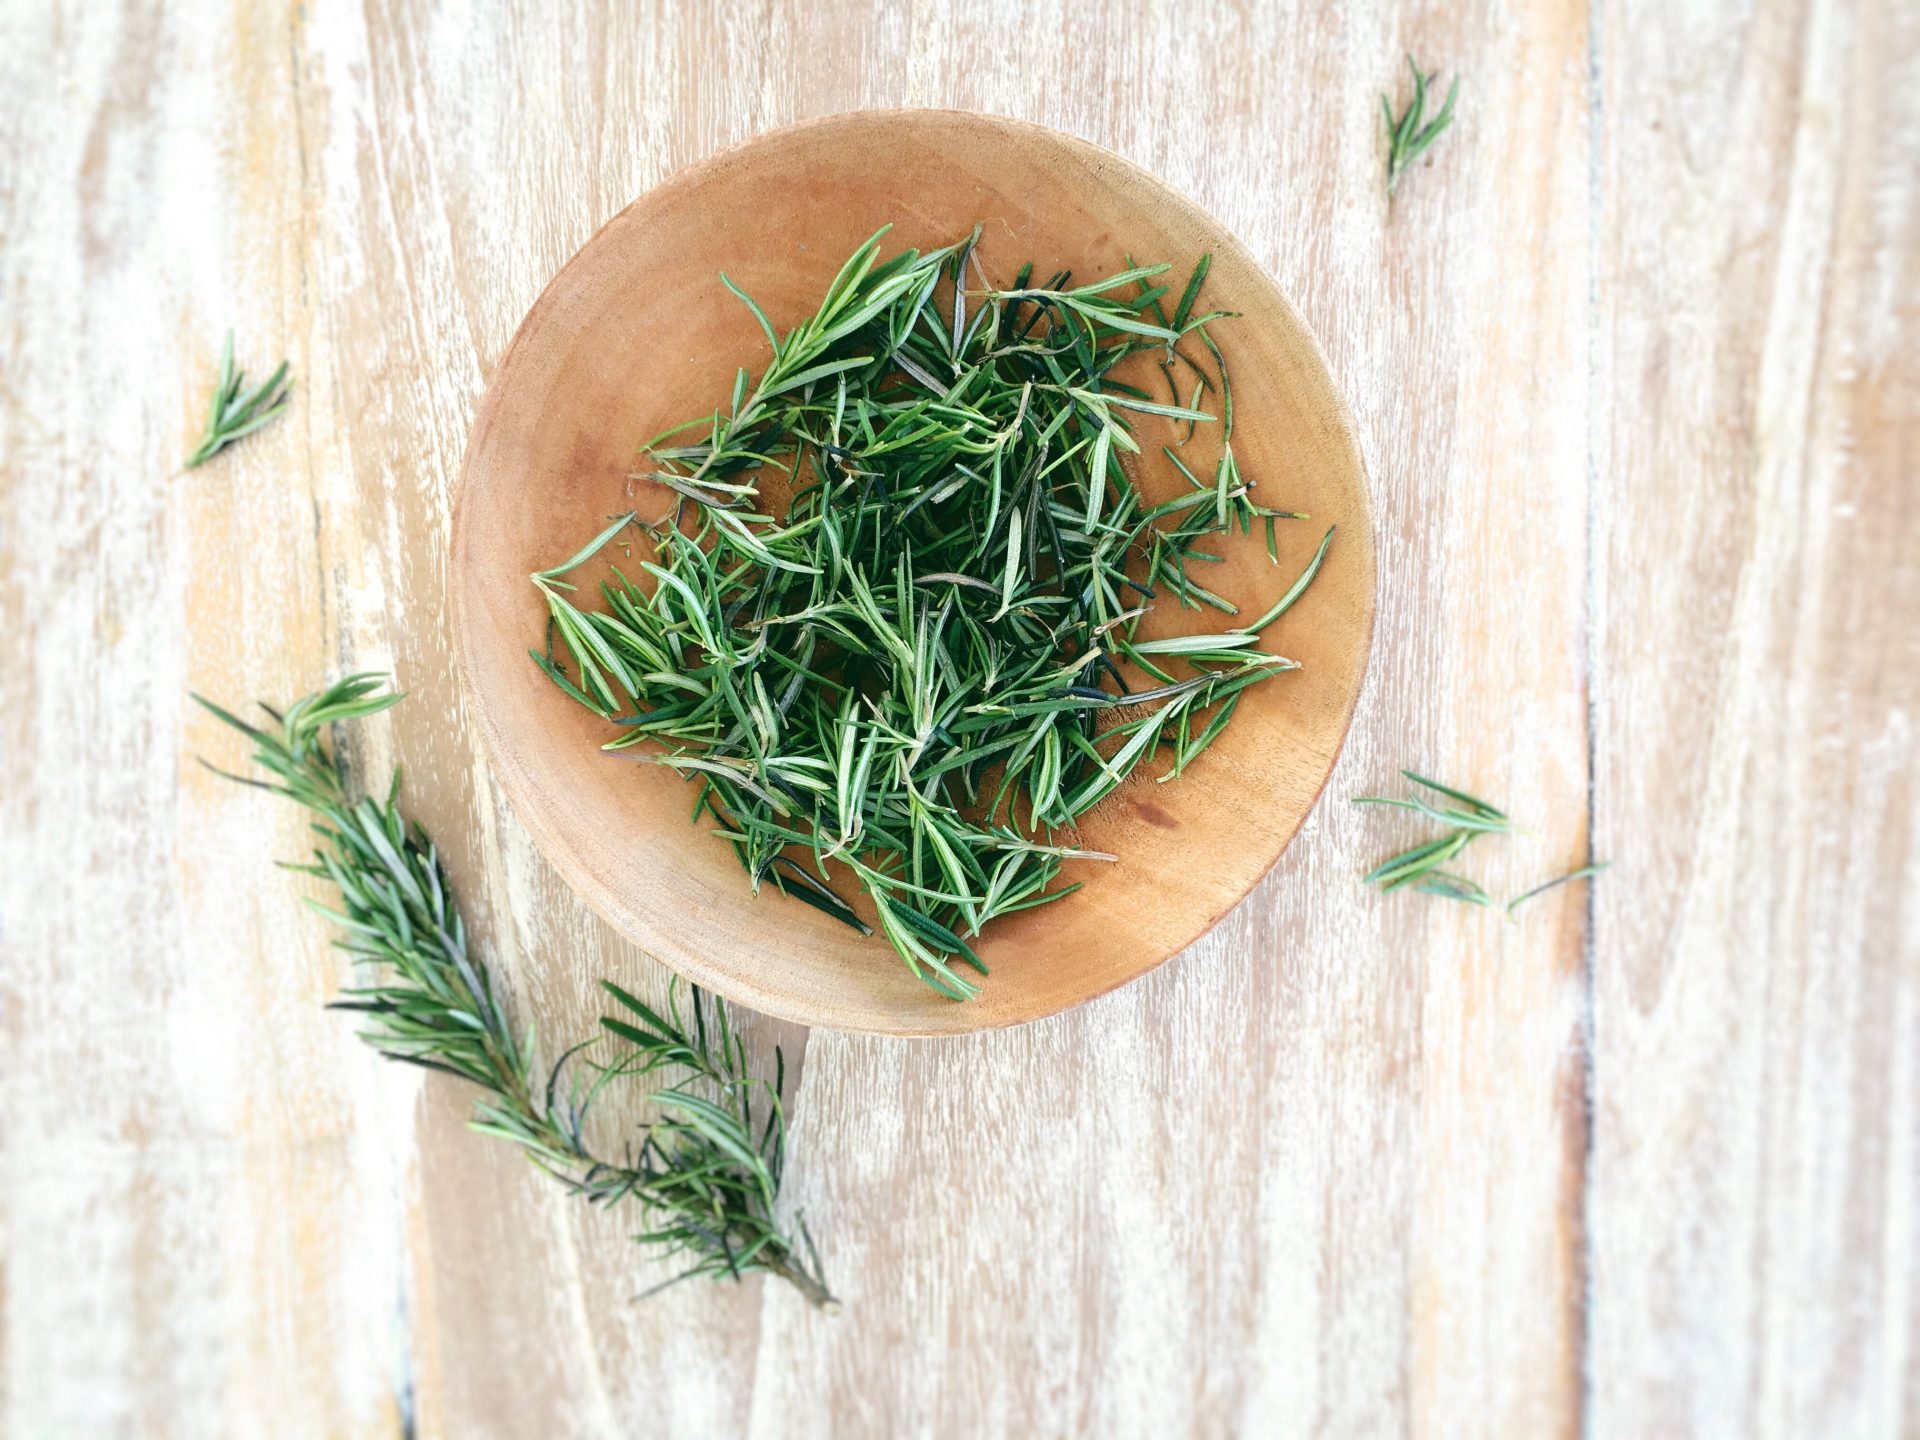 Can rosemary oil actually make my hair grow?